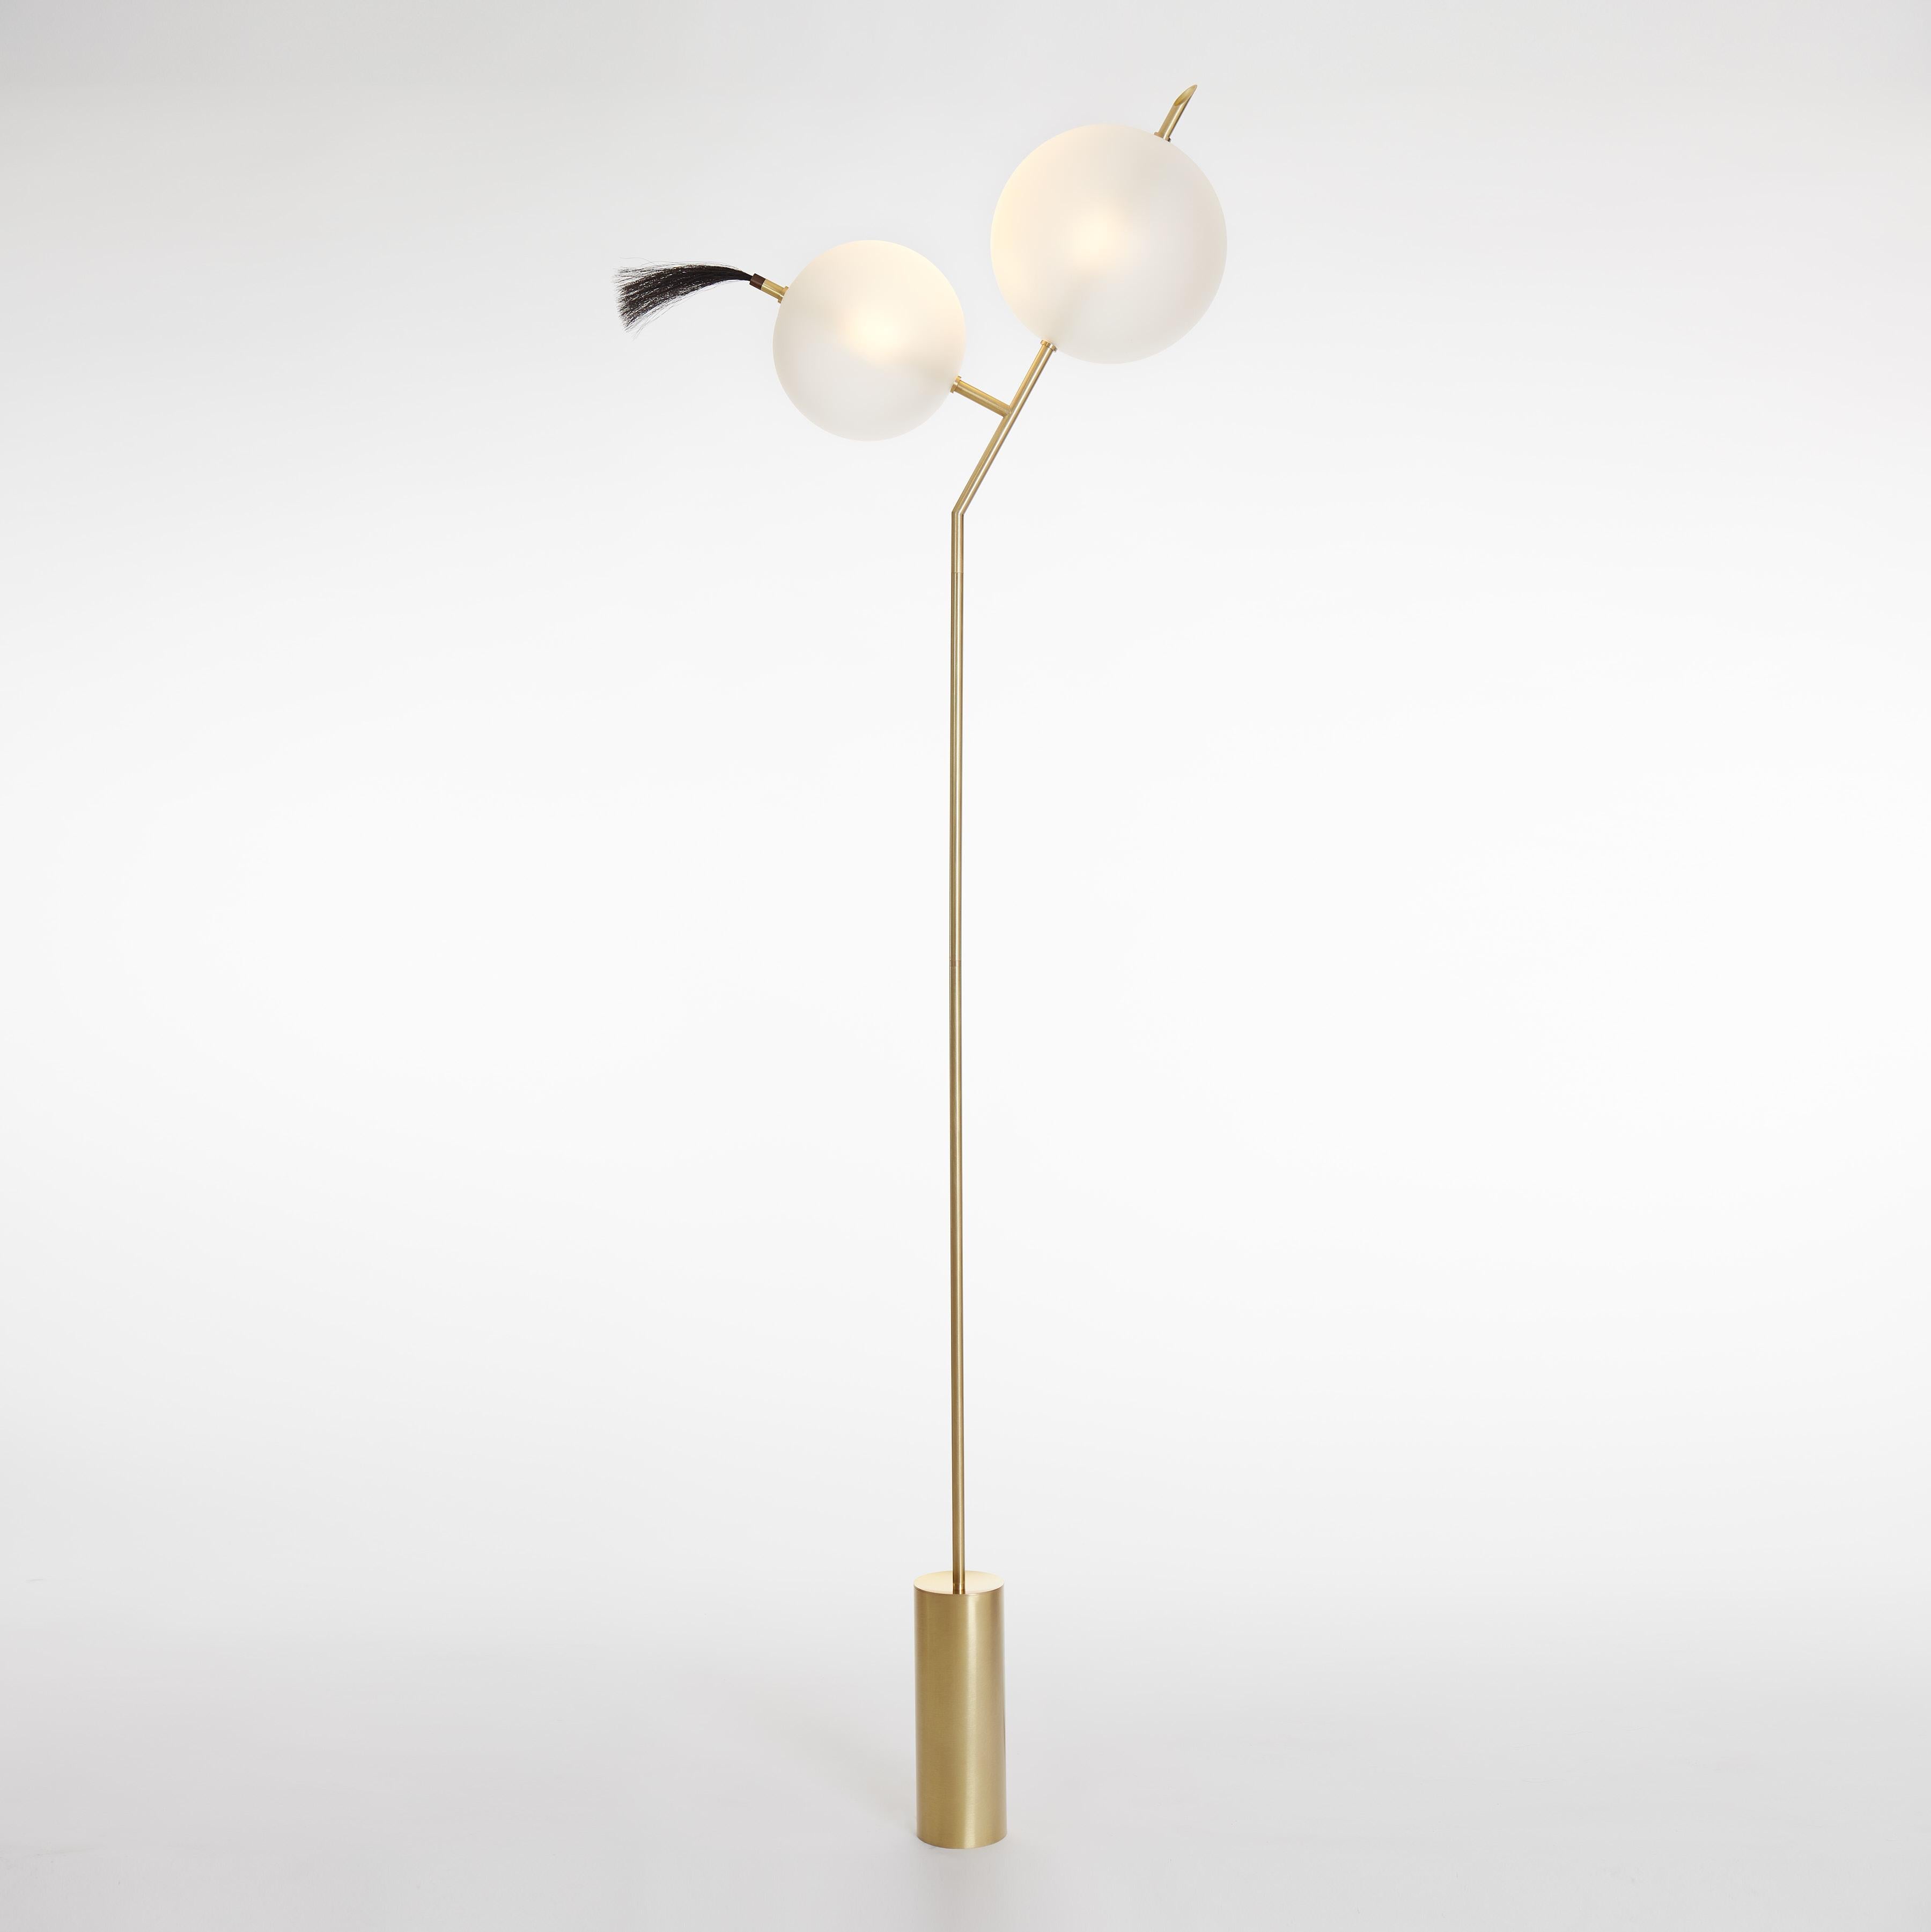 A playful nod, as the name suggests, to the world of cartoons, Mickey floor light is a Minimalist Contemporary Standing Lamp composed of two closely positioned glass spheres of different sizes.
As an option, on request, the horsehair detail can